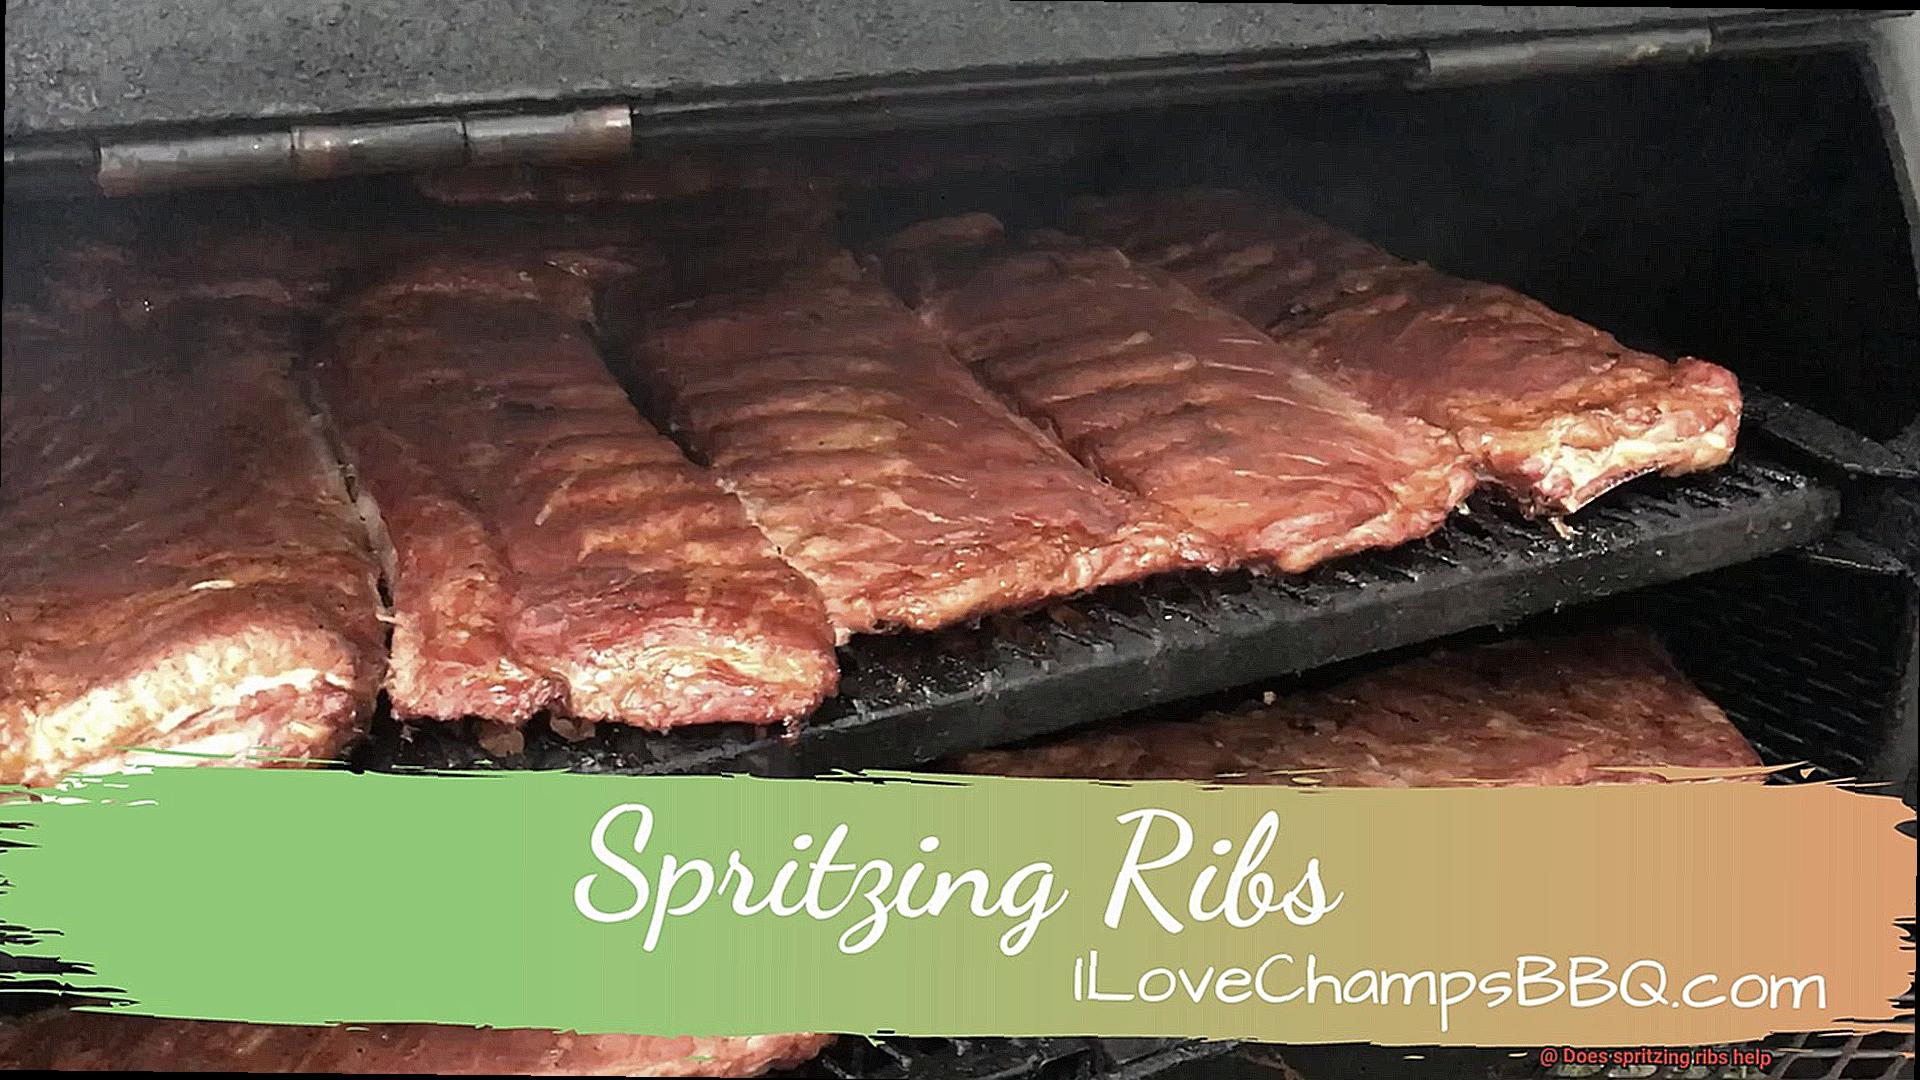 Does spritzing ribs help-3